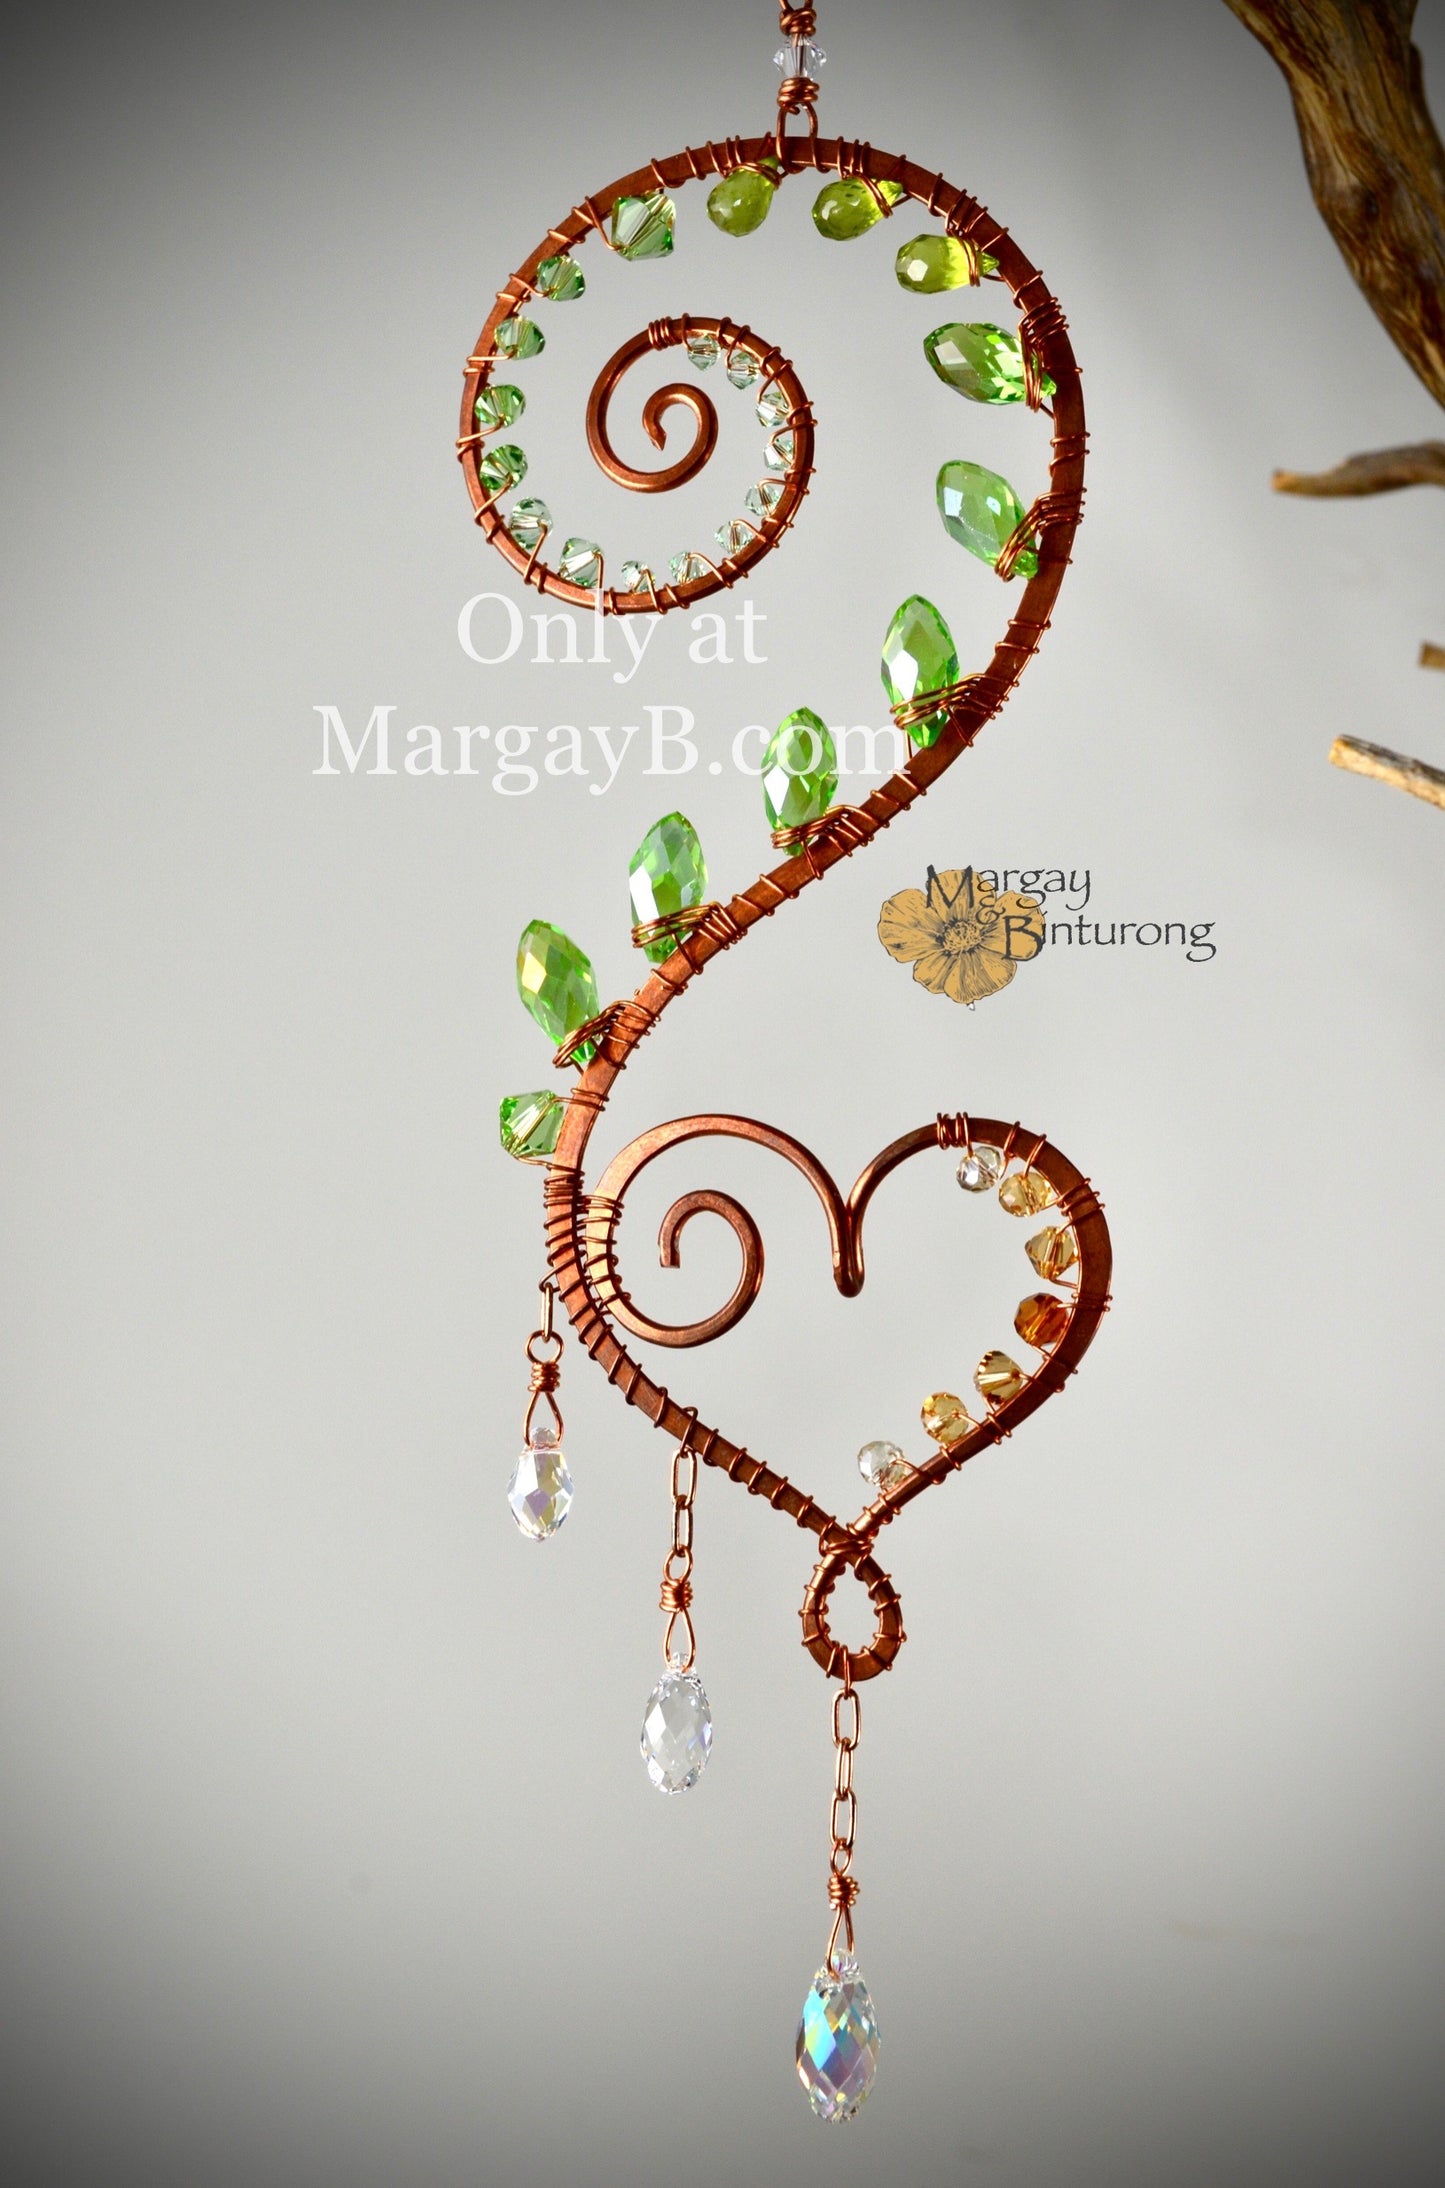 Handmade Curling Fern Mini Suncatcher Featuring Wire-Wrapped Crystal Prisms